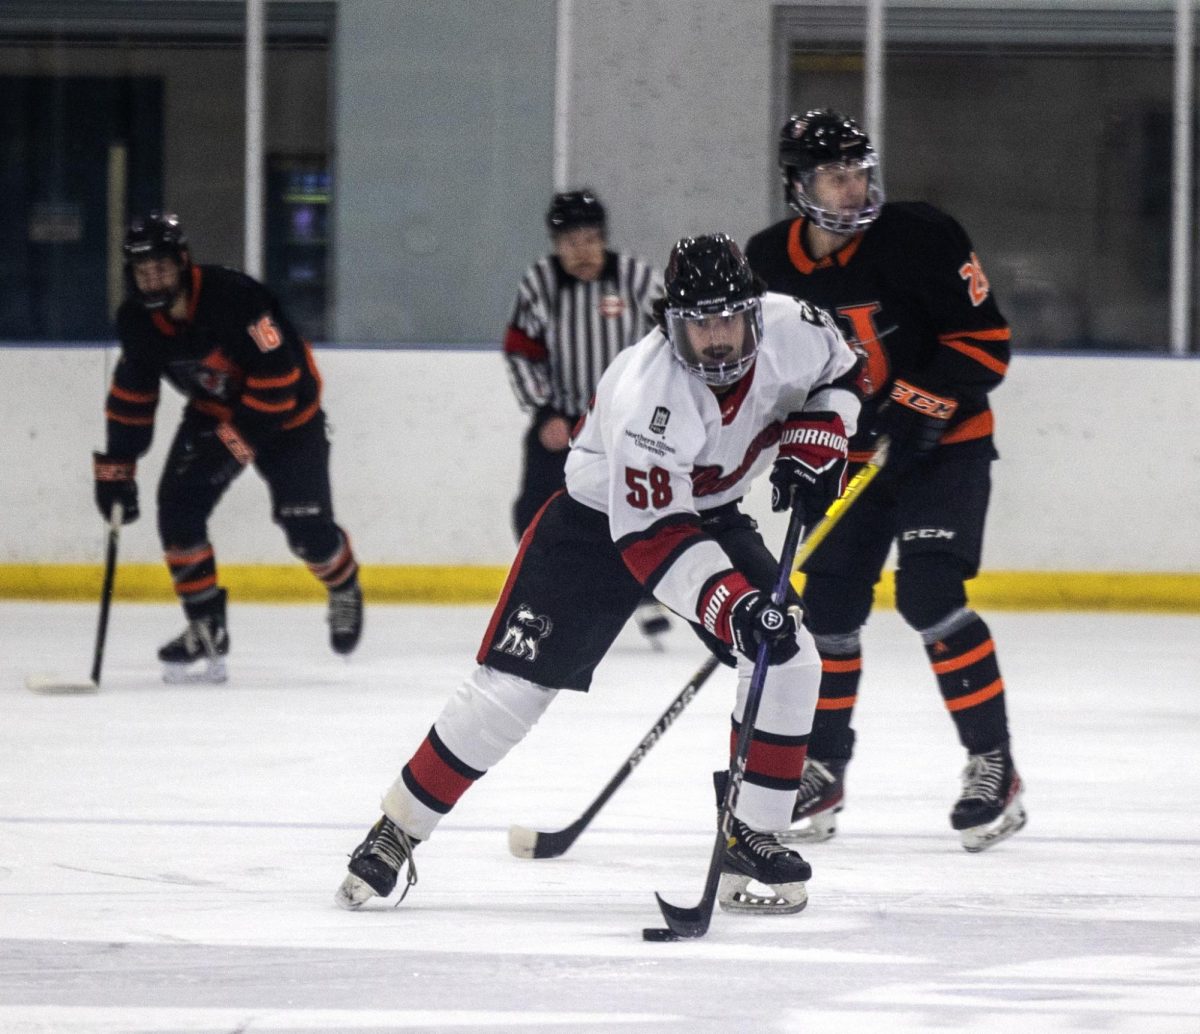 Freshman defenseman Ethan Koval rushes the puck through the neutral zone in NIU Hockeys game on Oct. 13. The Huskies will face Alabama, Rhode Island and Arizona State in the ACHA Showcase this weekend. (Courtesy of NIU Hockey)